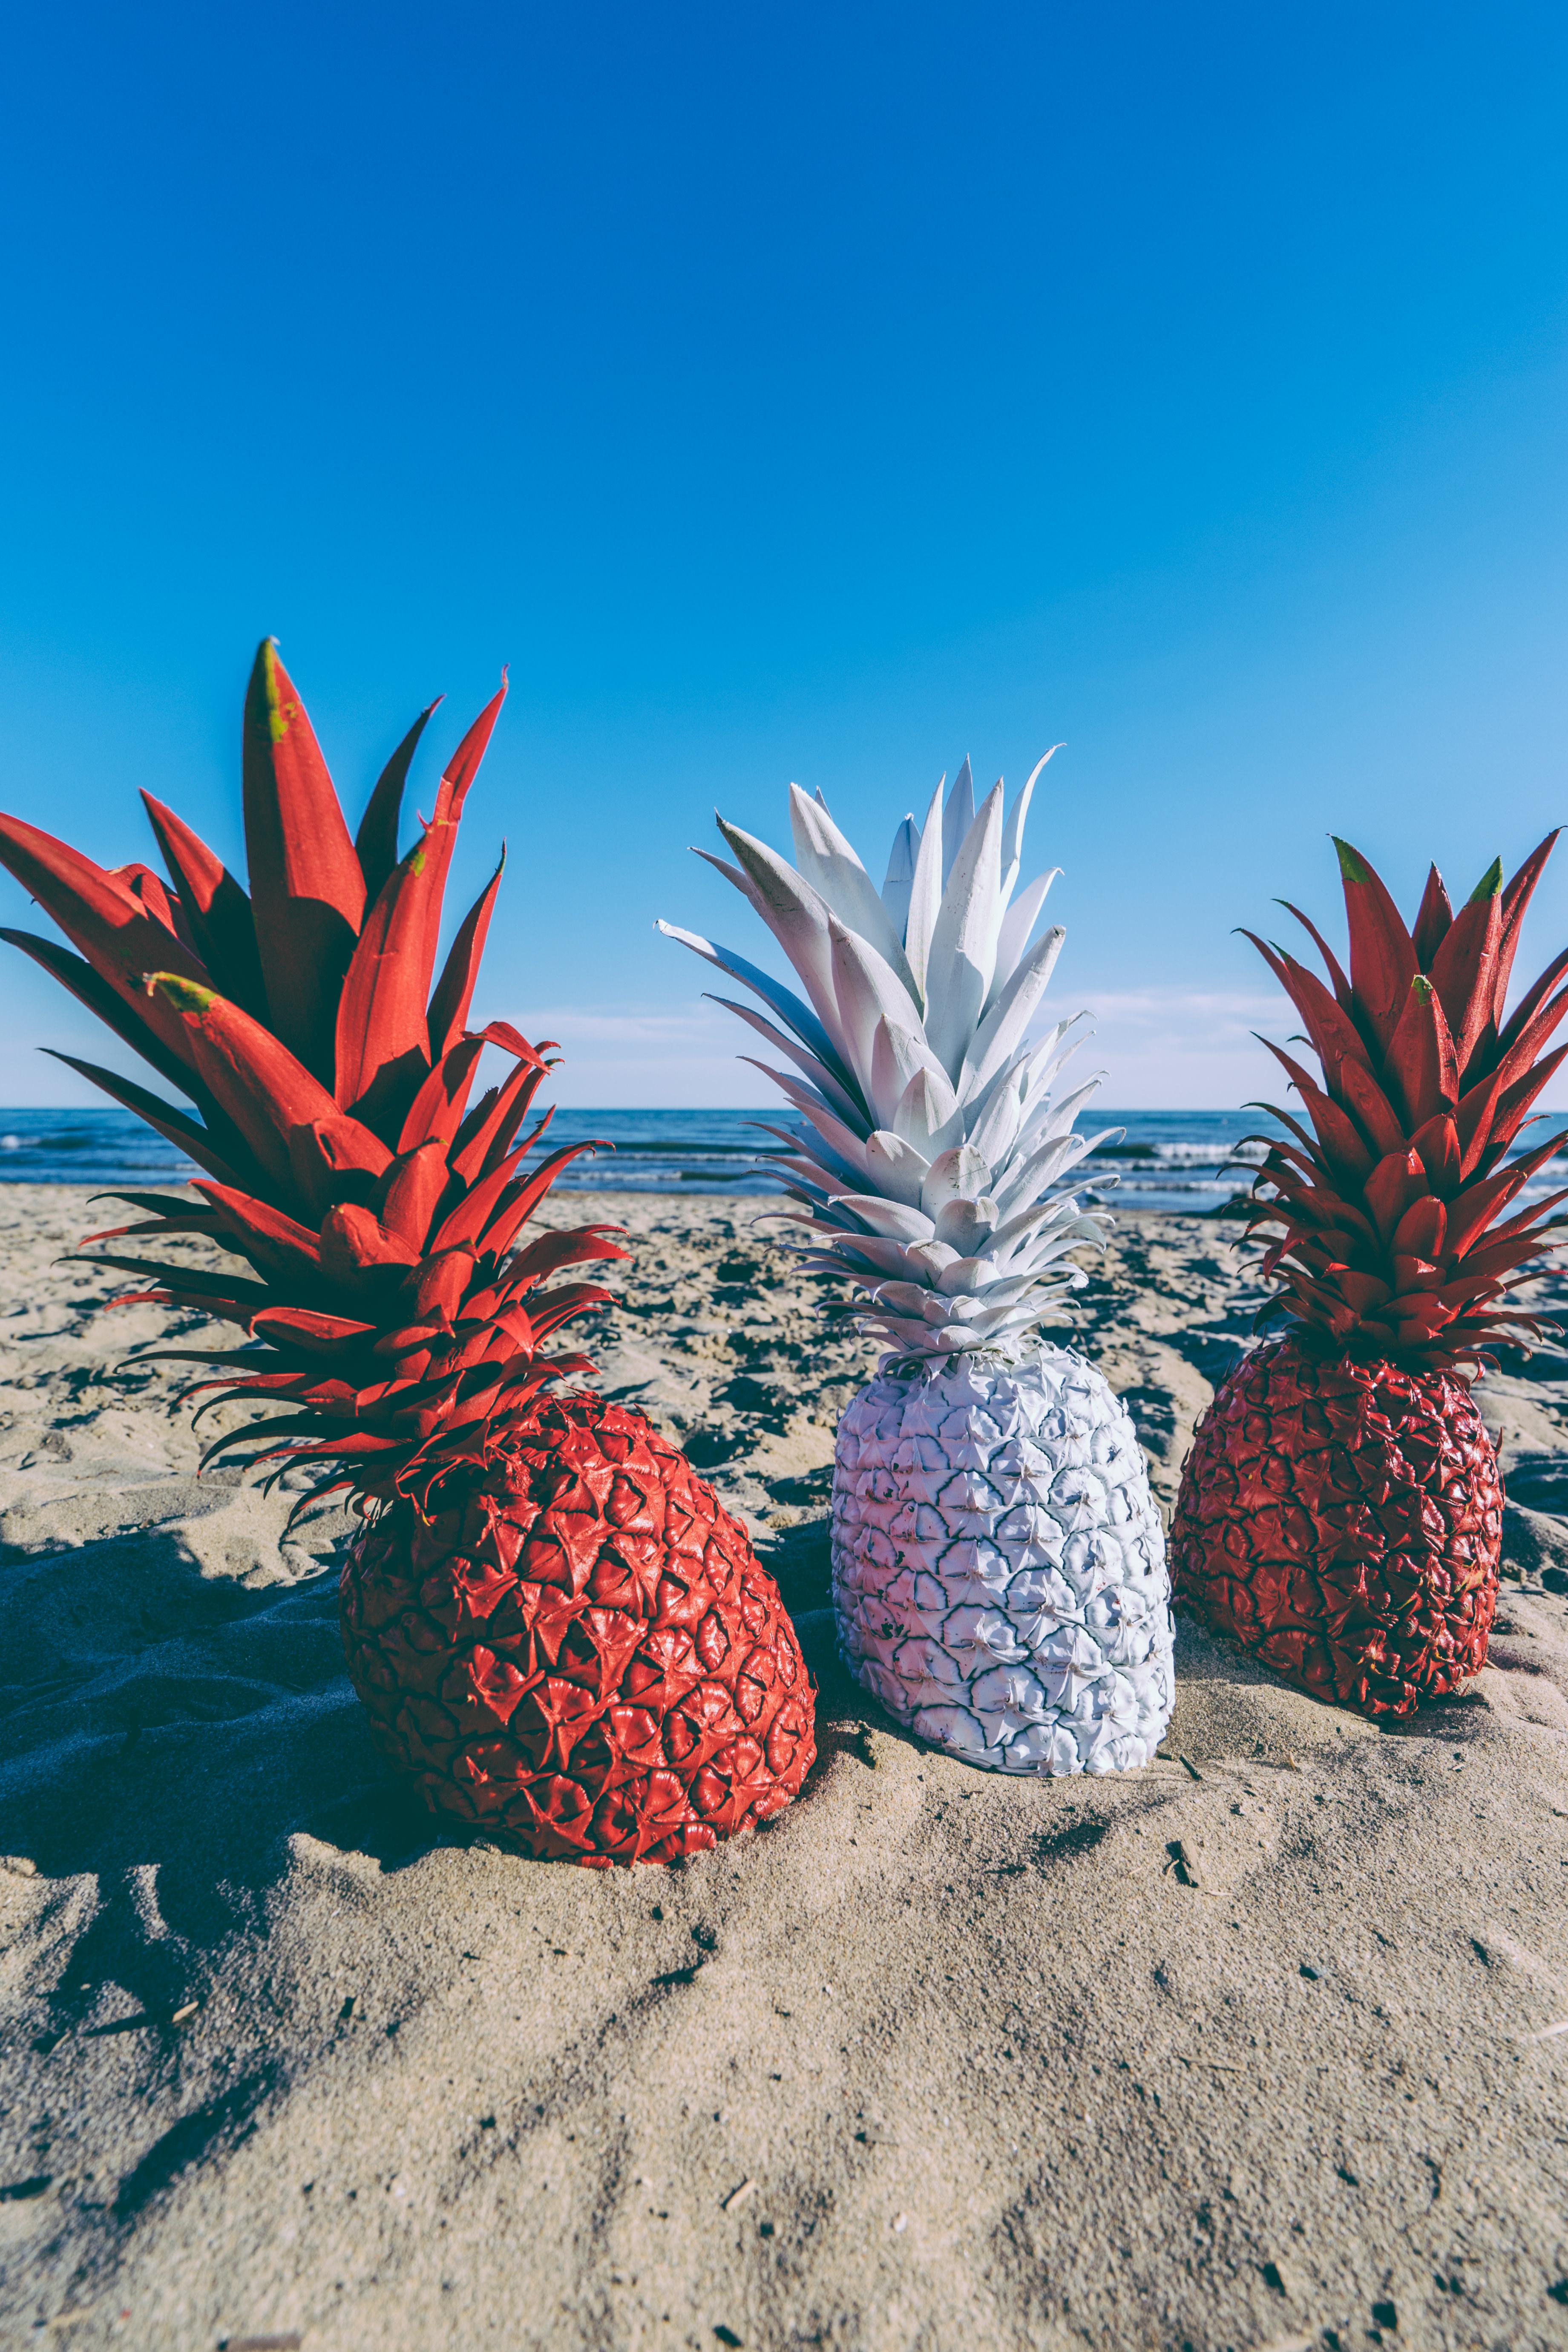 A Lost Pineapple Photo Pack! Now Available!. Pineapple